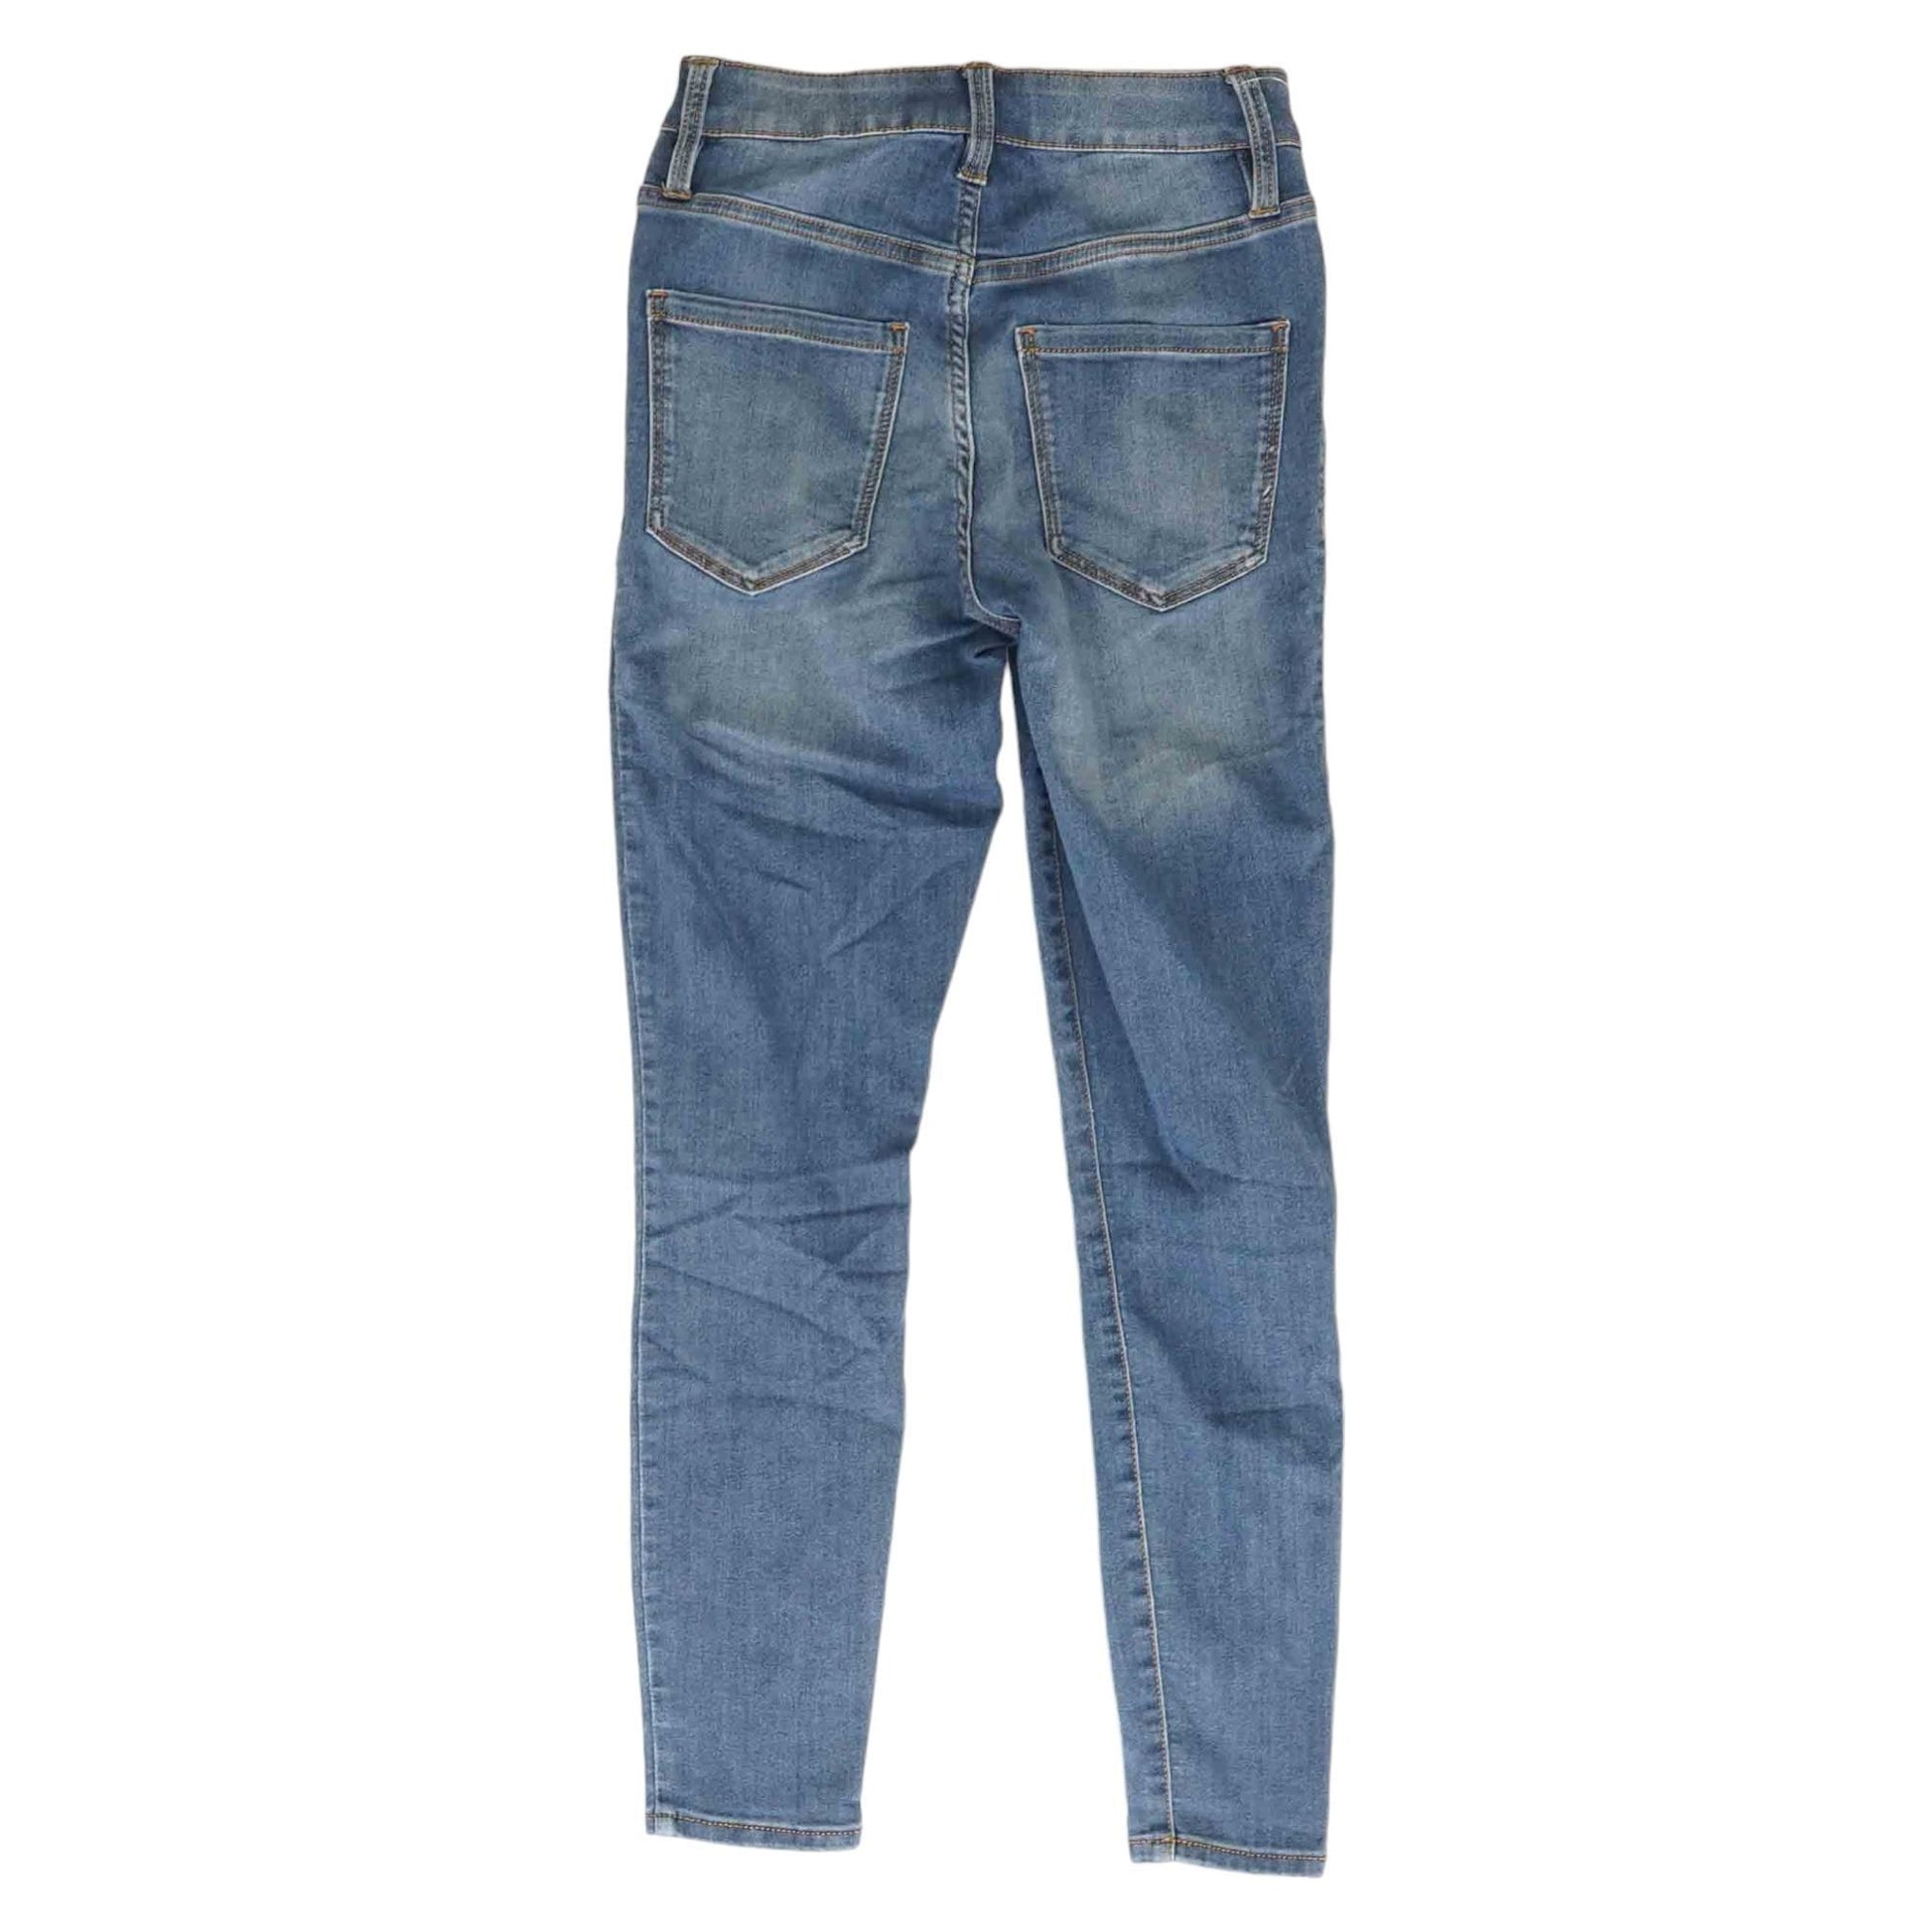 Lucky Brand Solid Blue Jeans Size 6 - 66% off